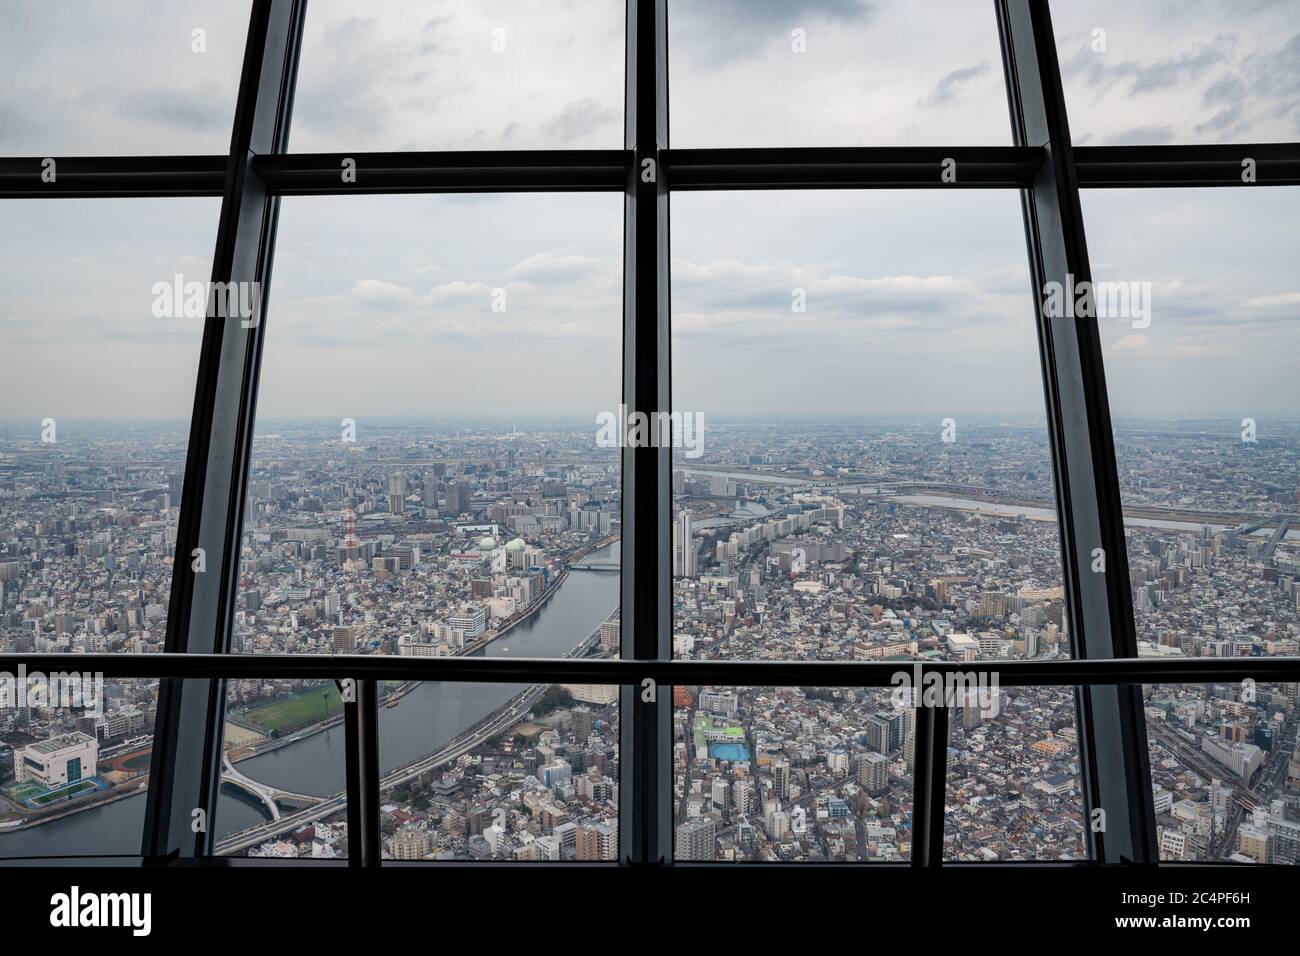 Cityscape from the 350th floor of Tokyo Skytree tower (the tallest tower in the world). Stock Photo